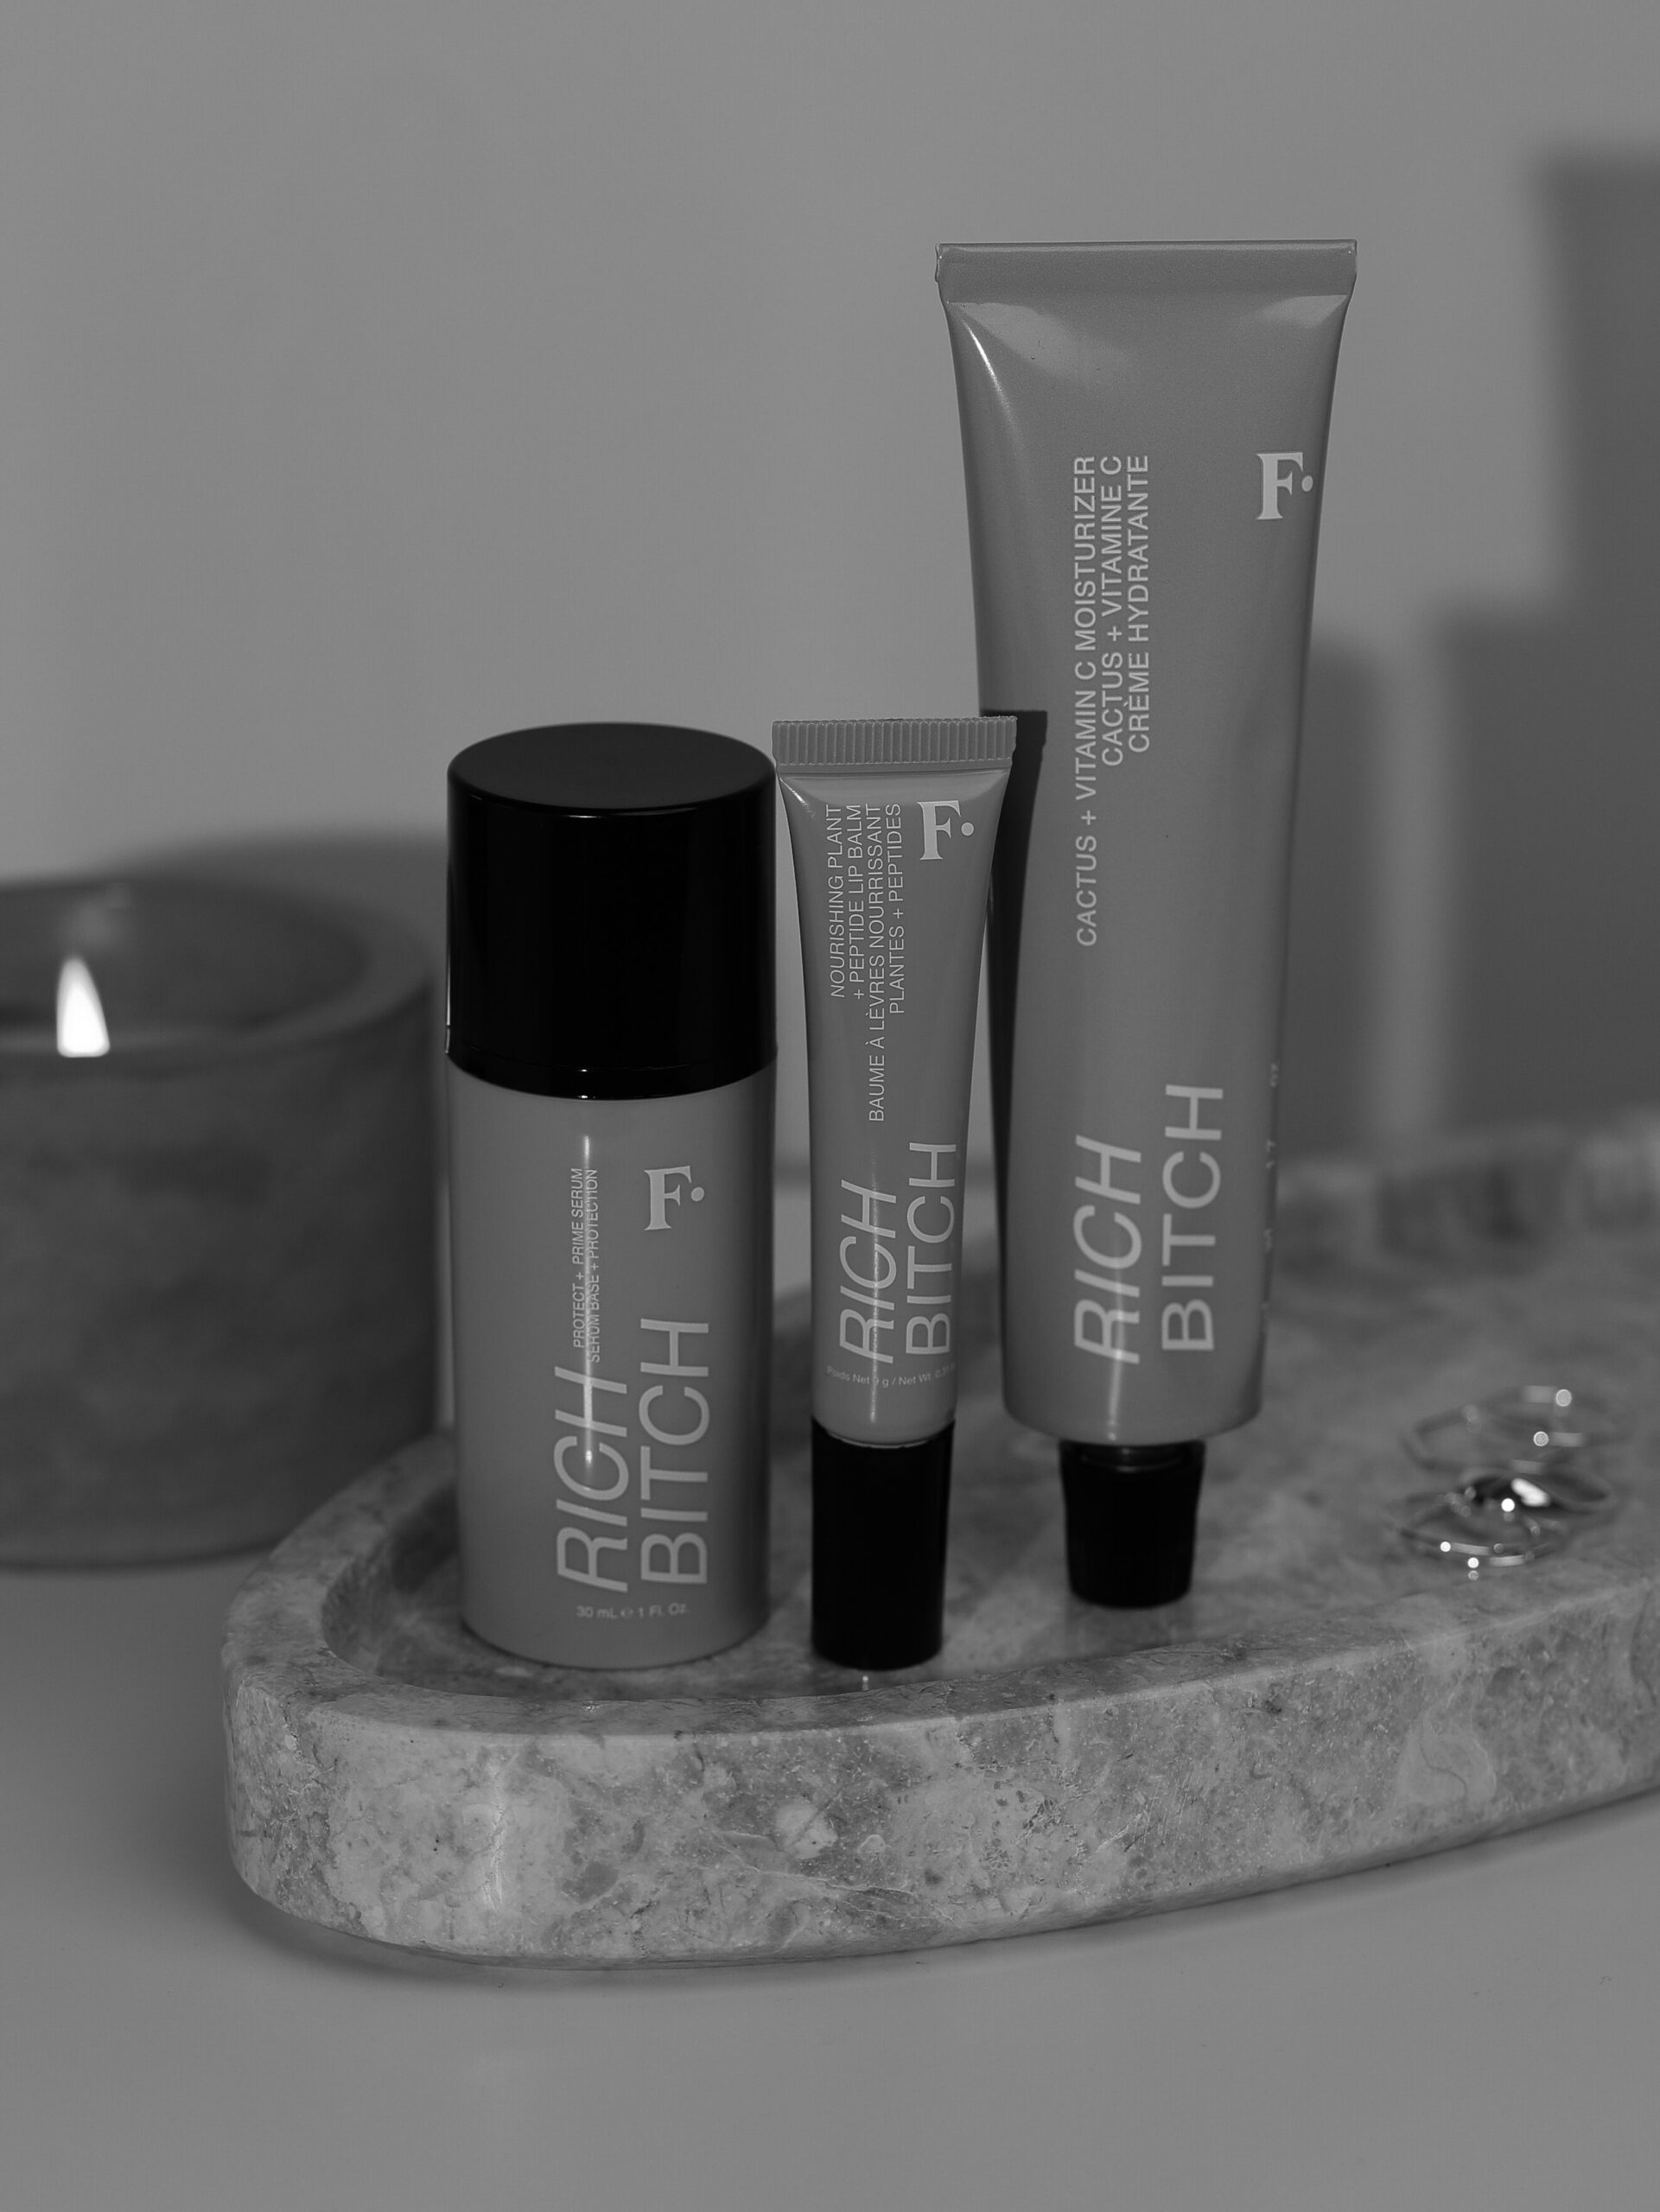 Rich Bitch skincare product line by Freck Beauty